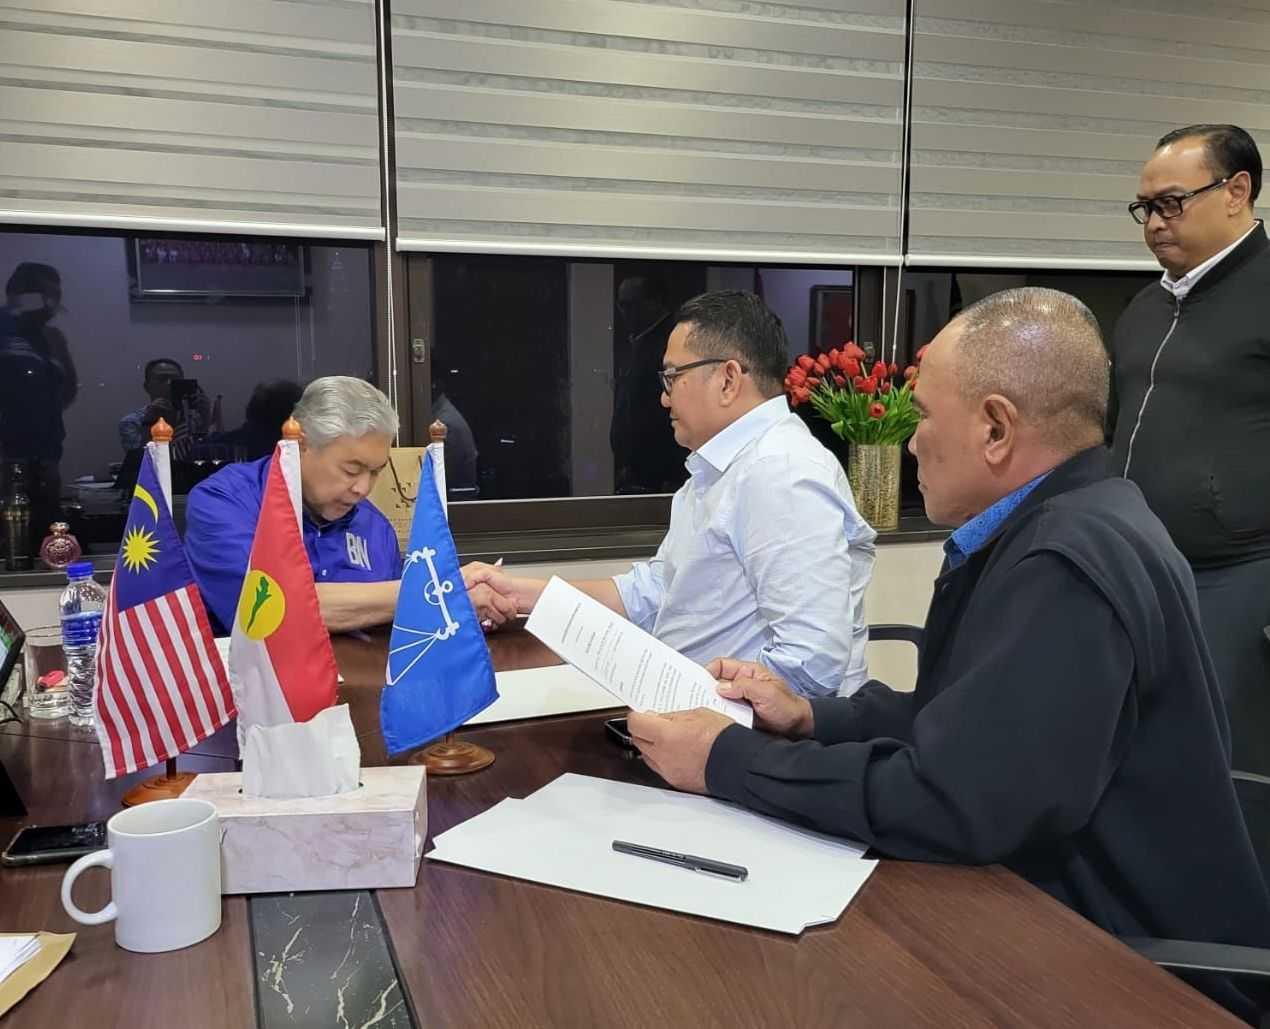 Anuar Basiran, the deputy Umno chief in Sepang, shakes hands with party president Ahmad Zahid Hamidi after signing a statutory declaration in this picture making the rounds on social media.